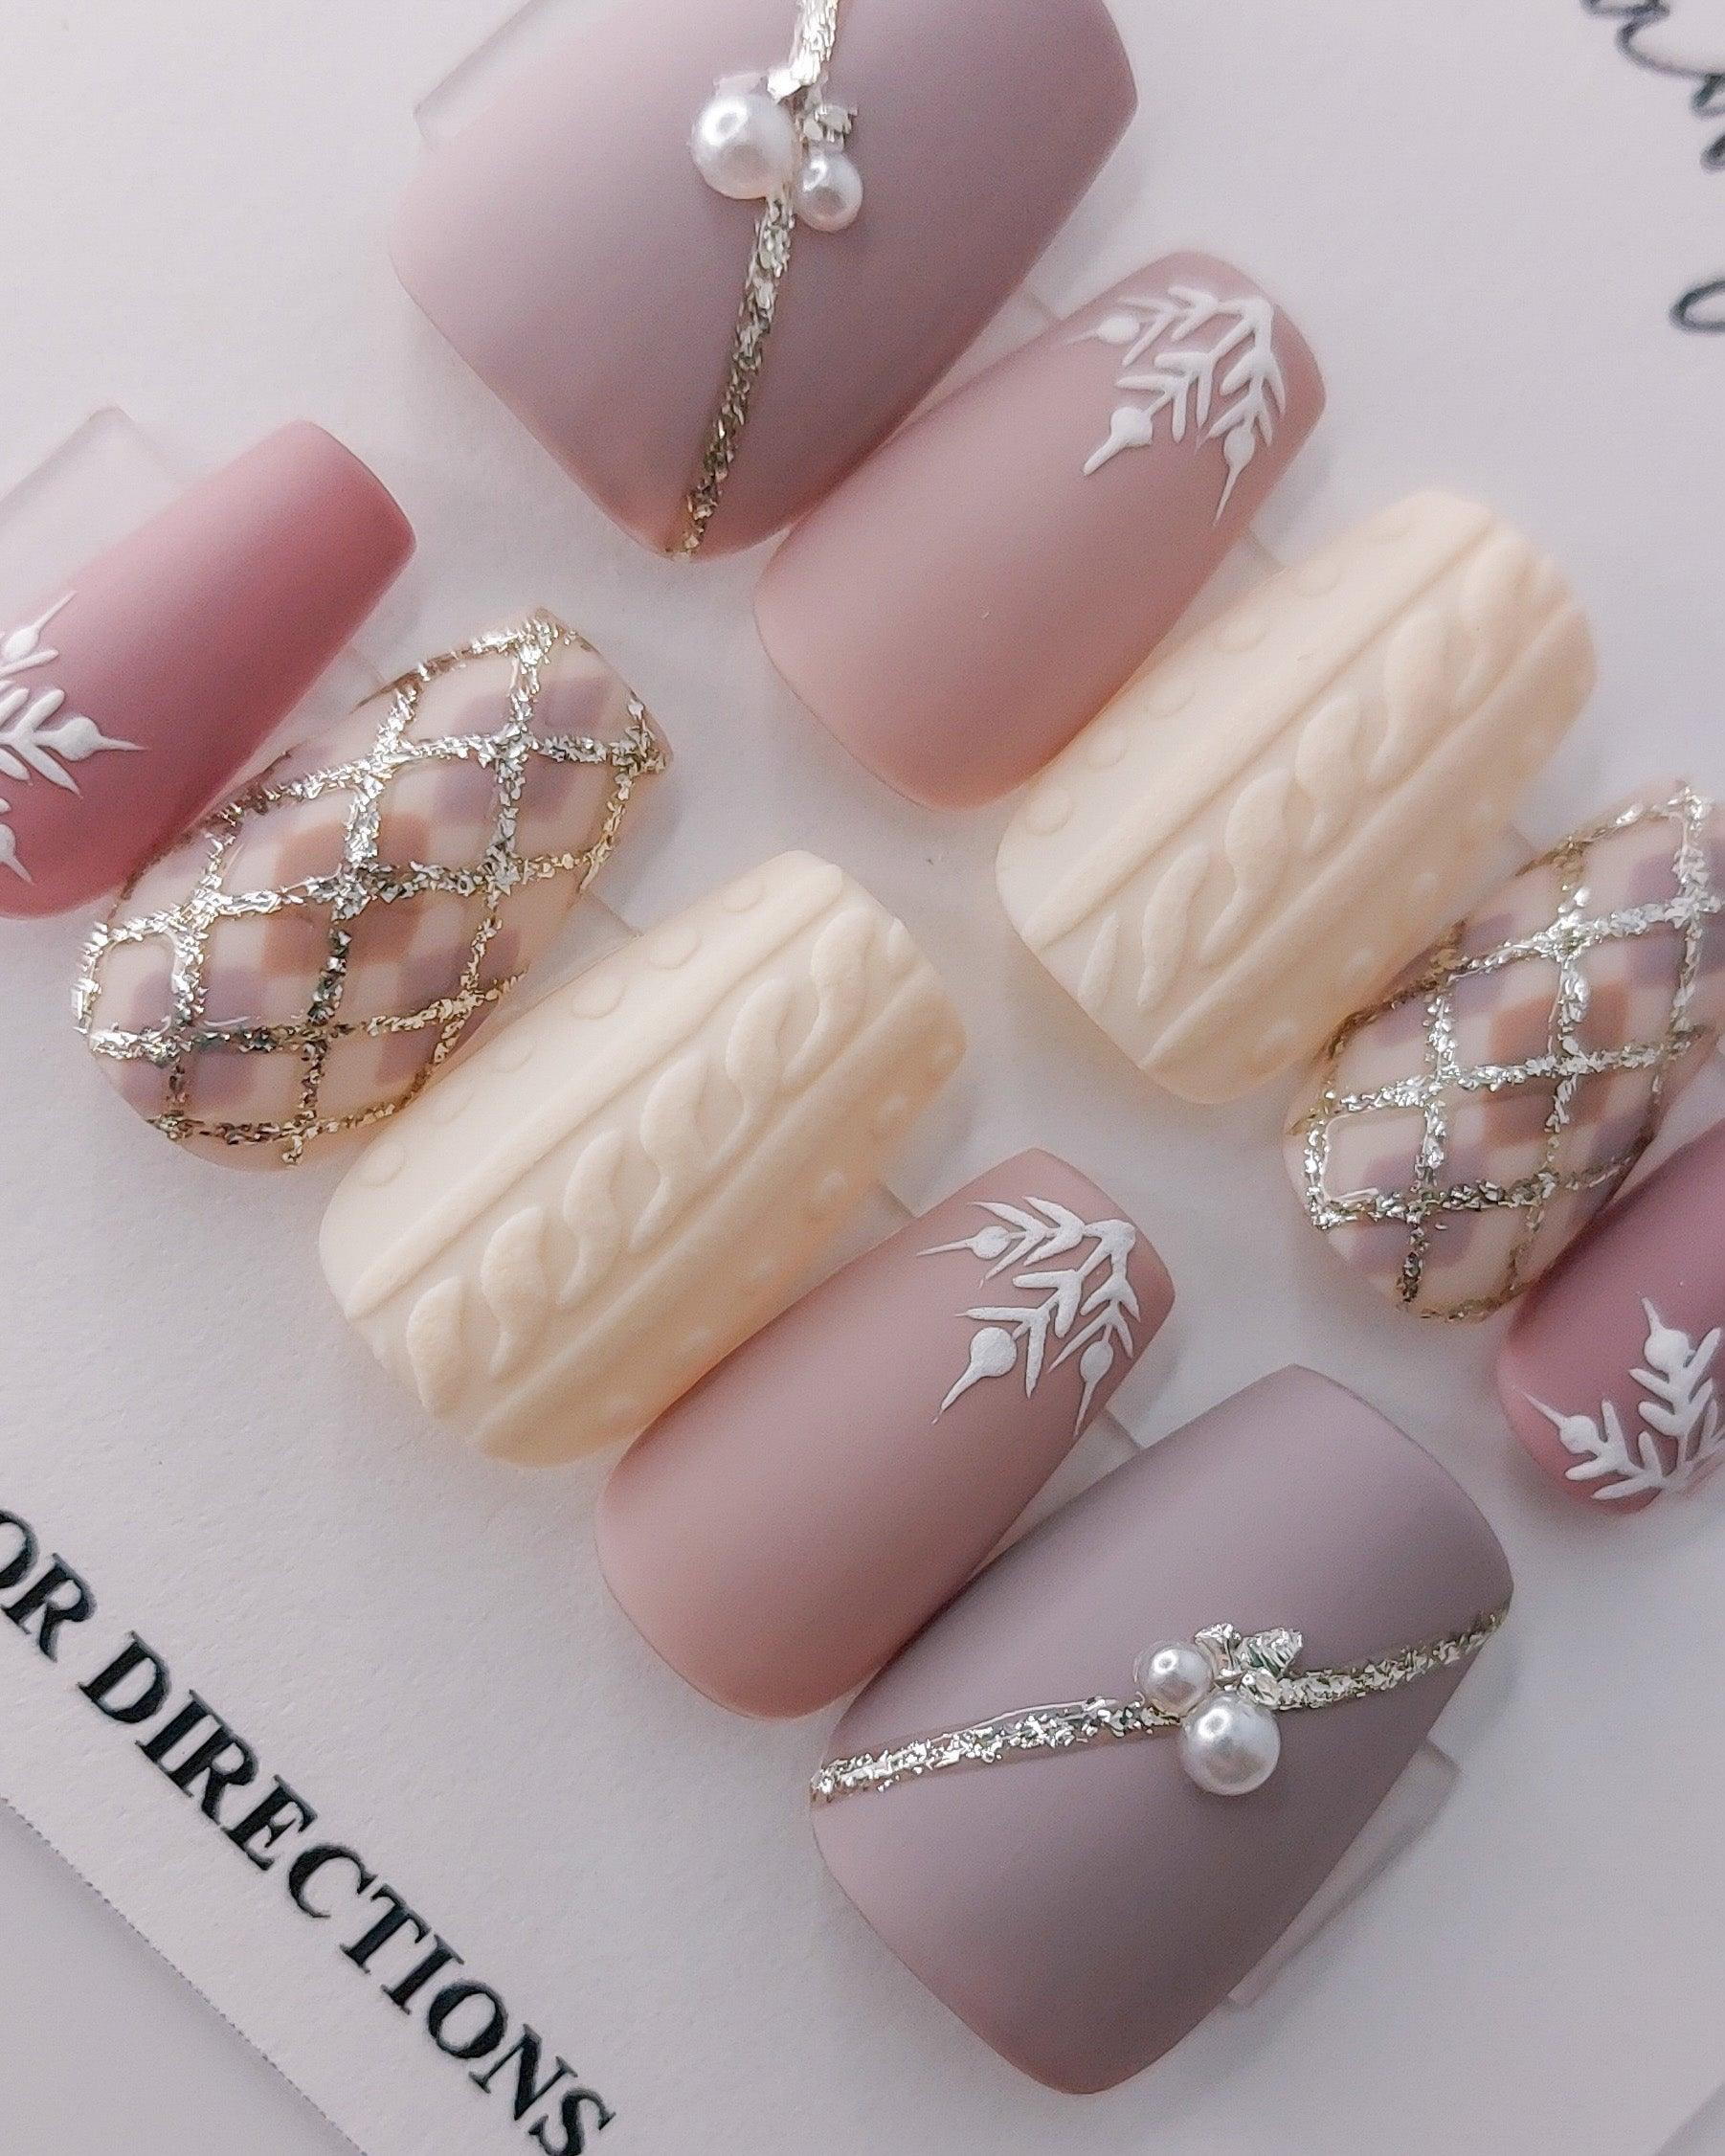 10 Press-On Nail Sets To Wear On Vacation | HuffPost Life